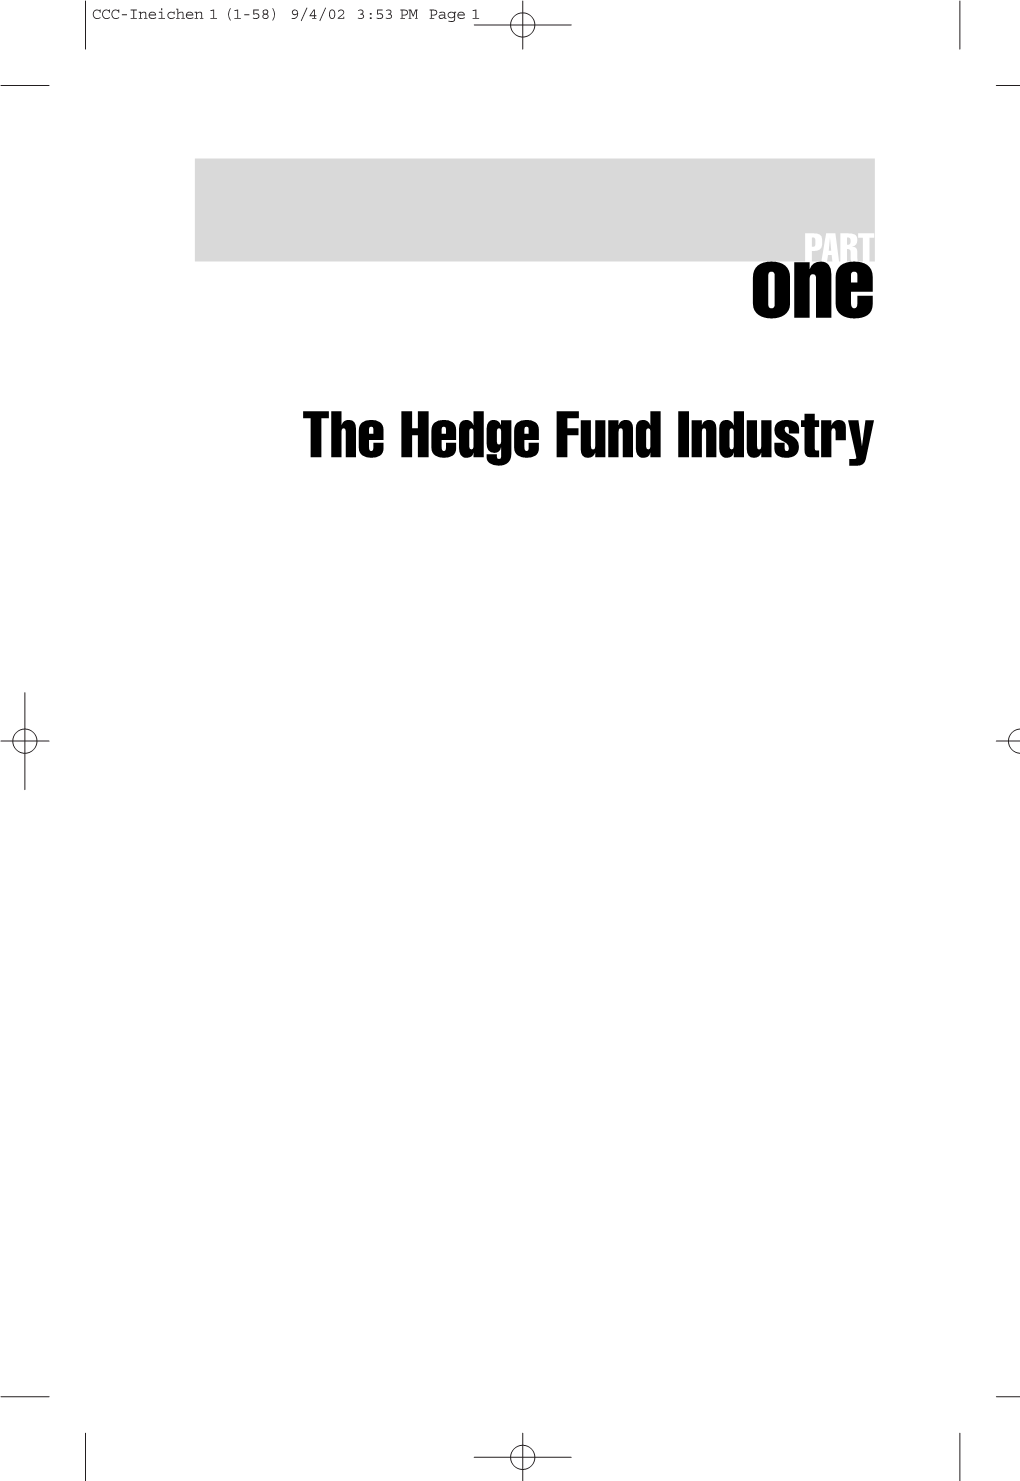 The Hedge Fund Industry CCC-Ineichen 1 (1-58) 9/4/02 3:53 PM Page 2 CCC-Ineichen 1 (1-58) 9/4/02 3:53 PM Page 3